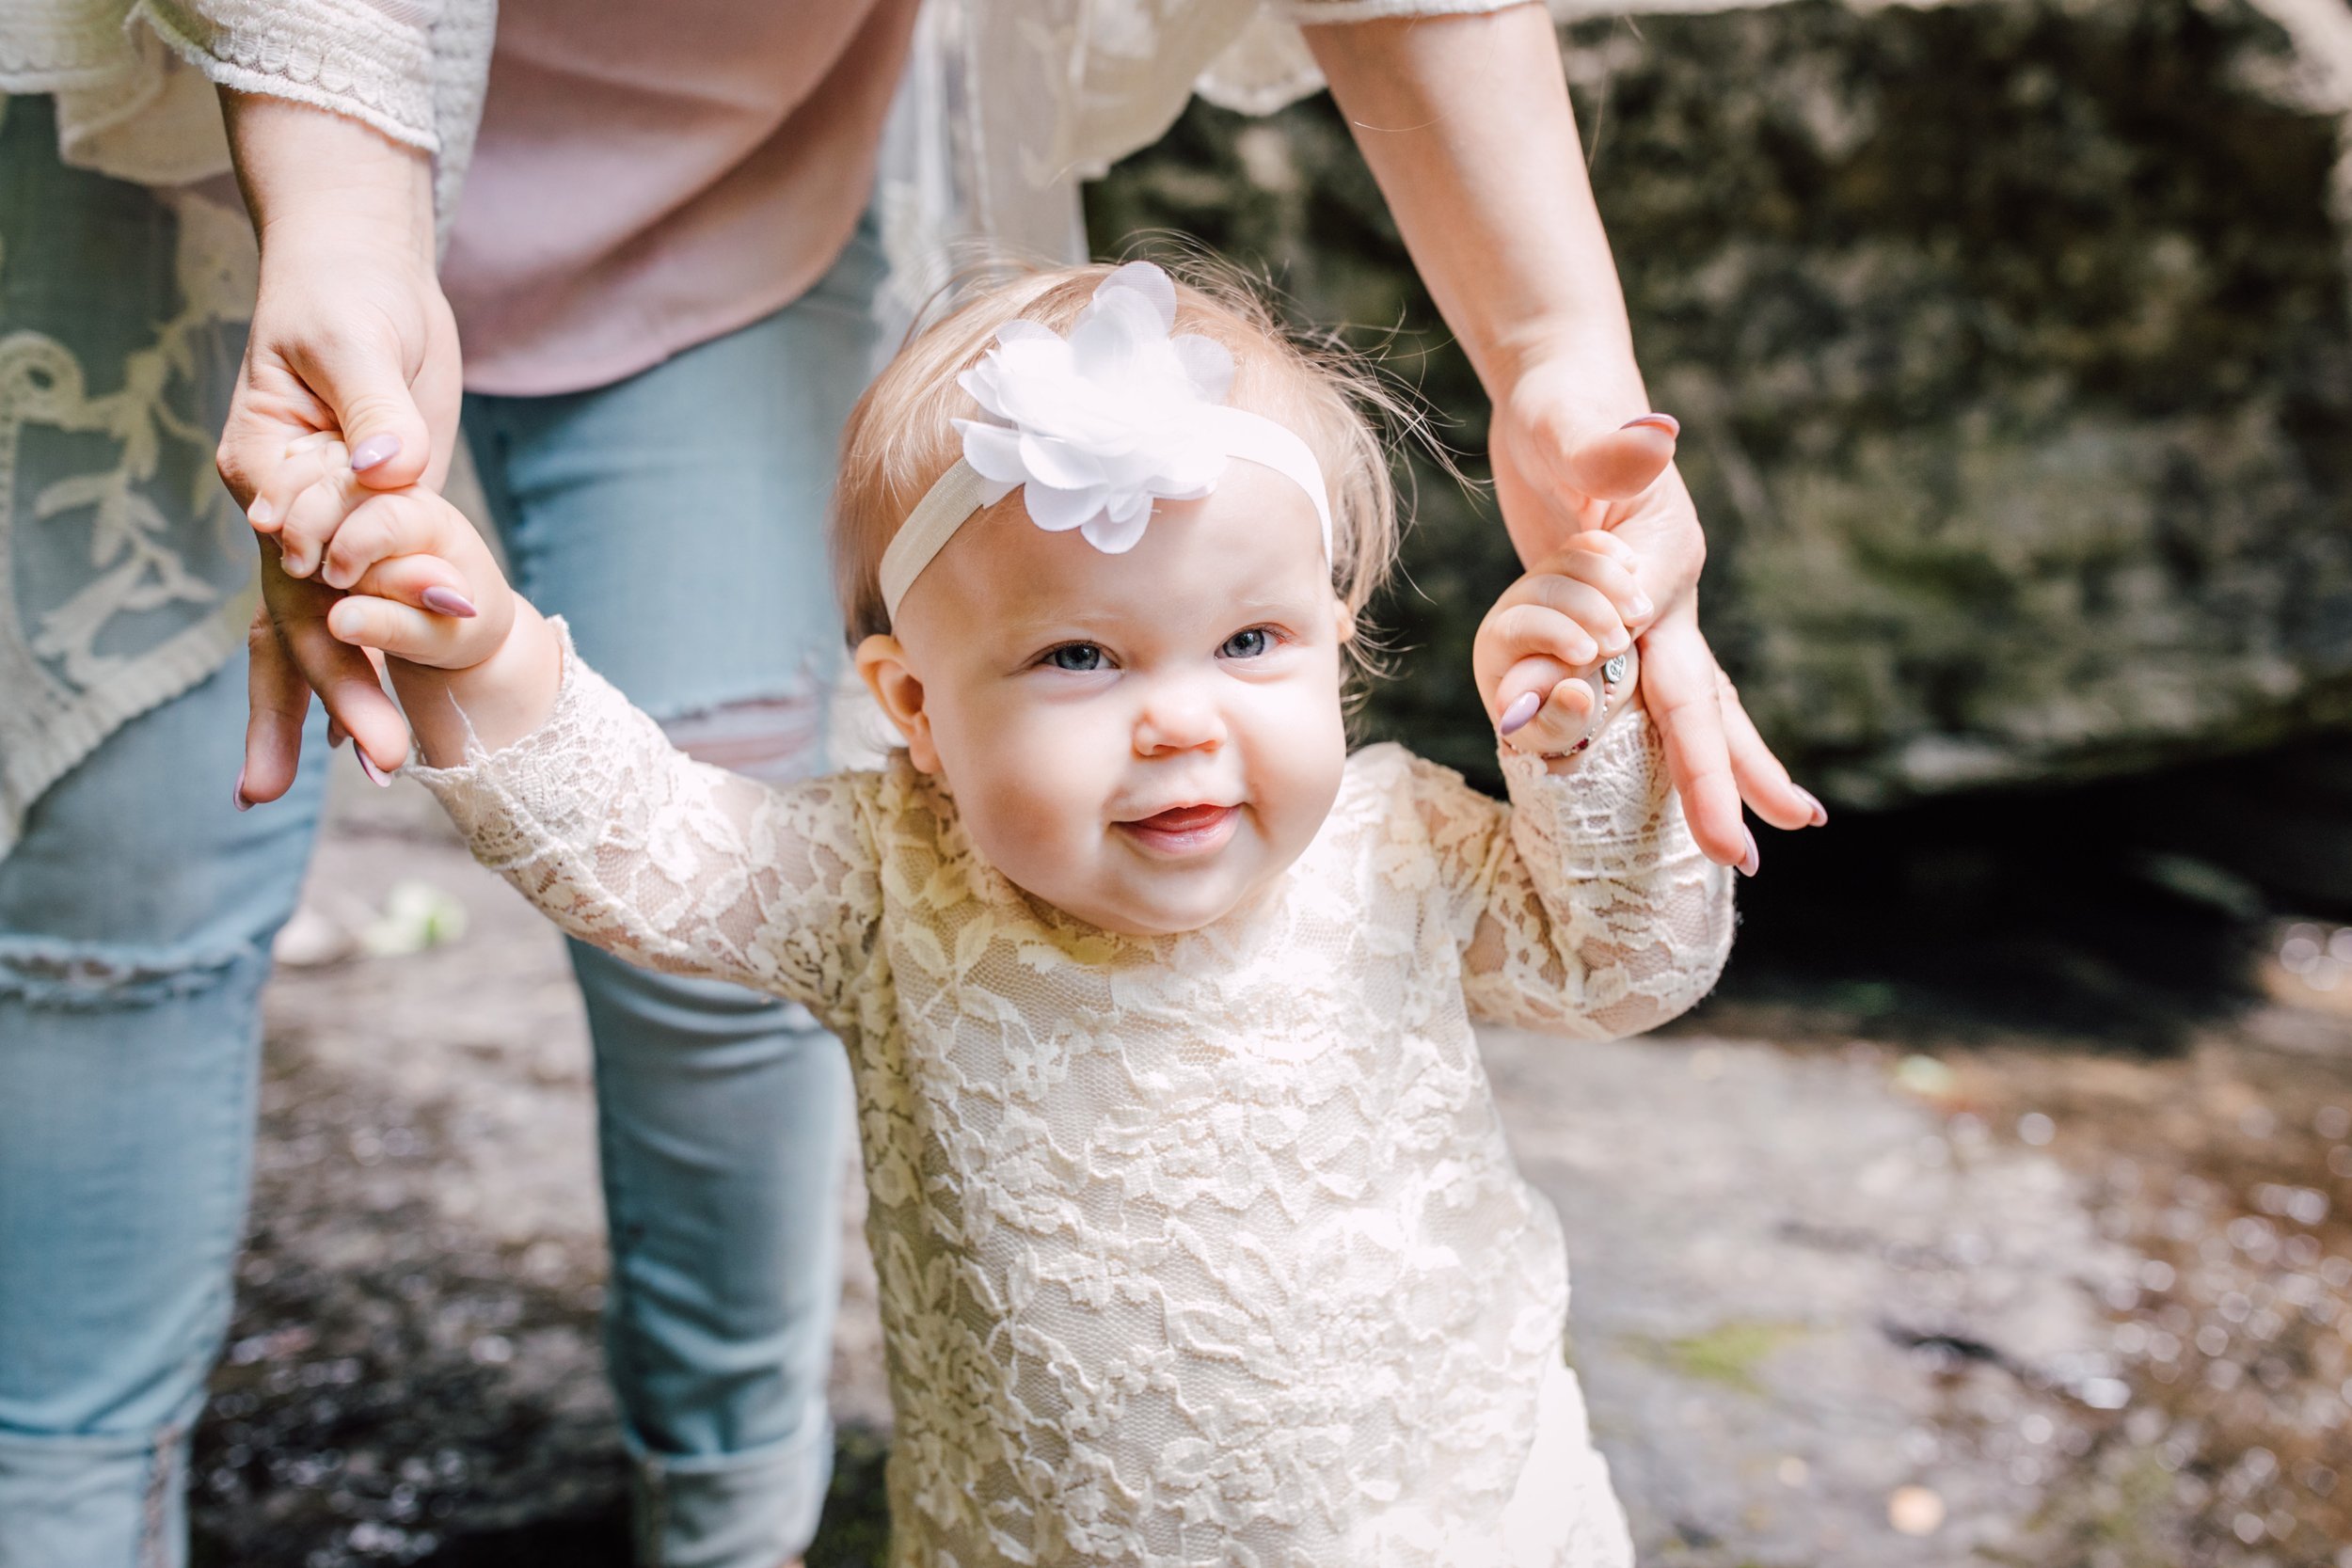  Mom holds her baby’s hands while she smiles during an waterfall photo shoot 